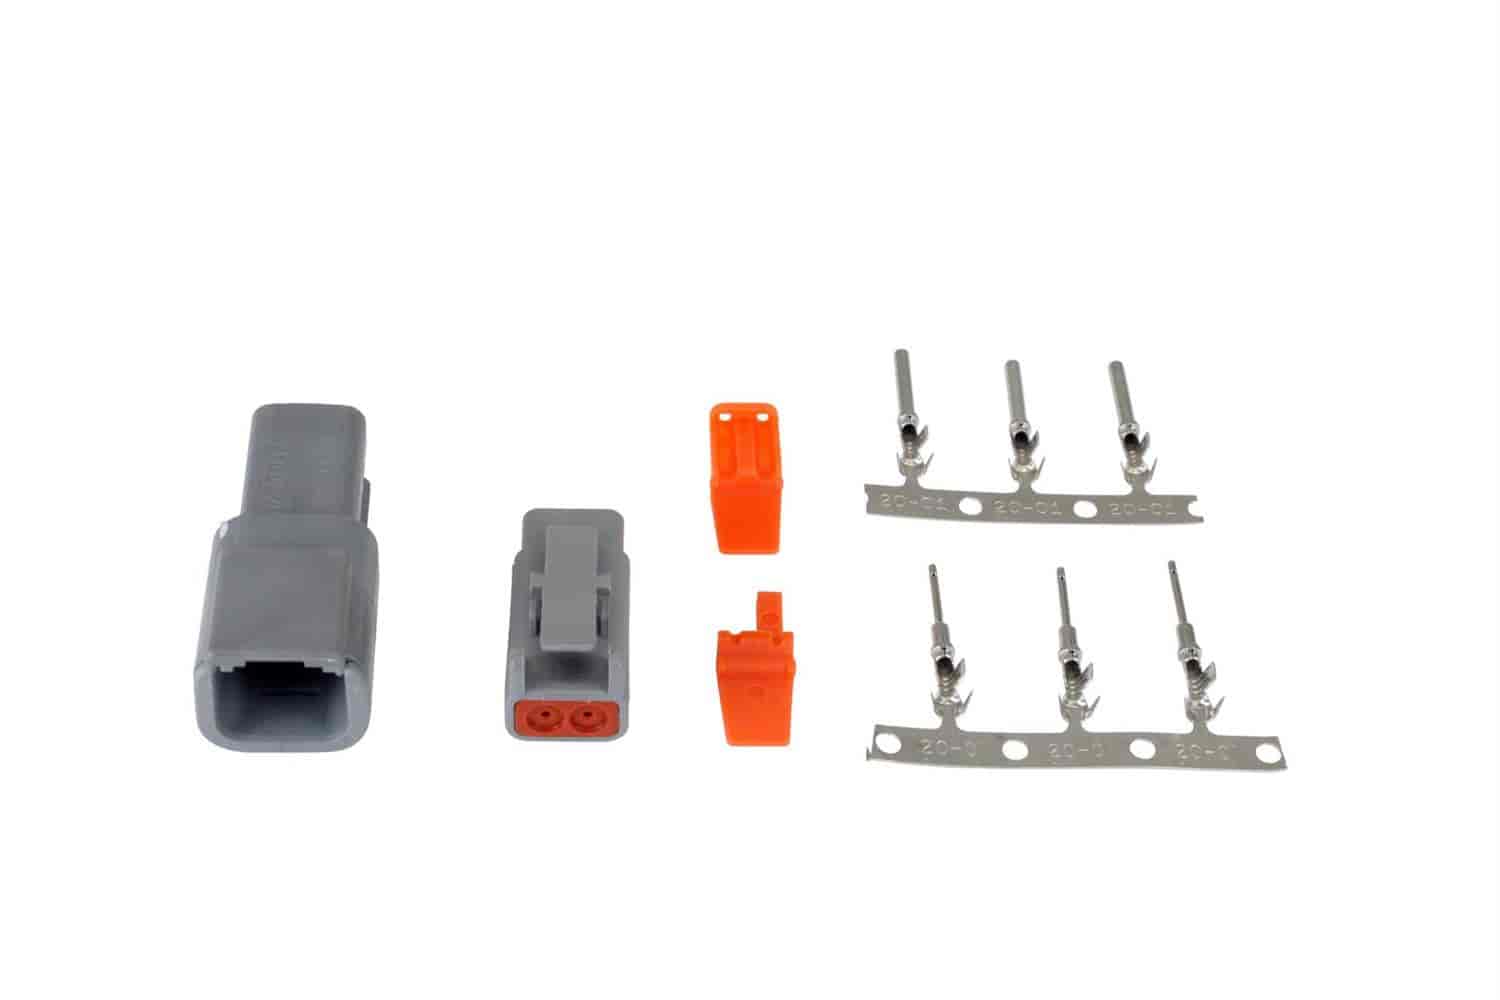 DTM-Style 2-Way Connector Kit Includes Plug, Receptacle, Plug Wedge Lock, Receptacle Wedge Lock, 3 Female Pins And 3 Male Pins